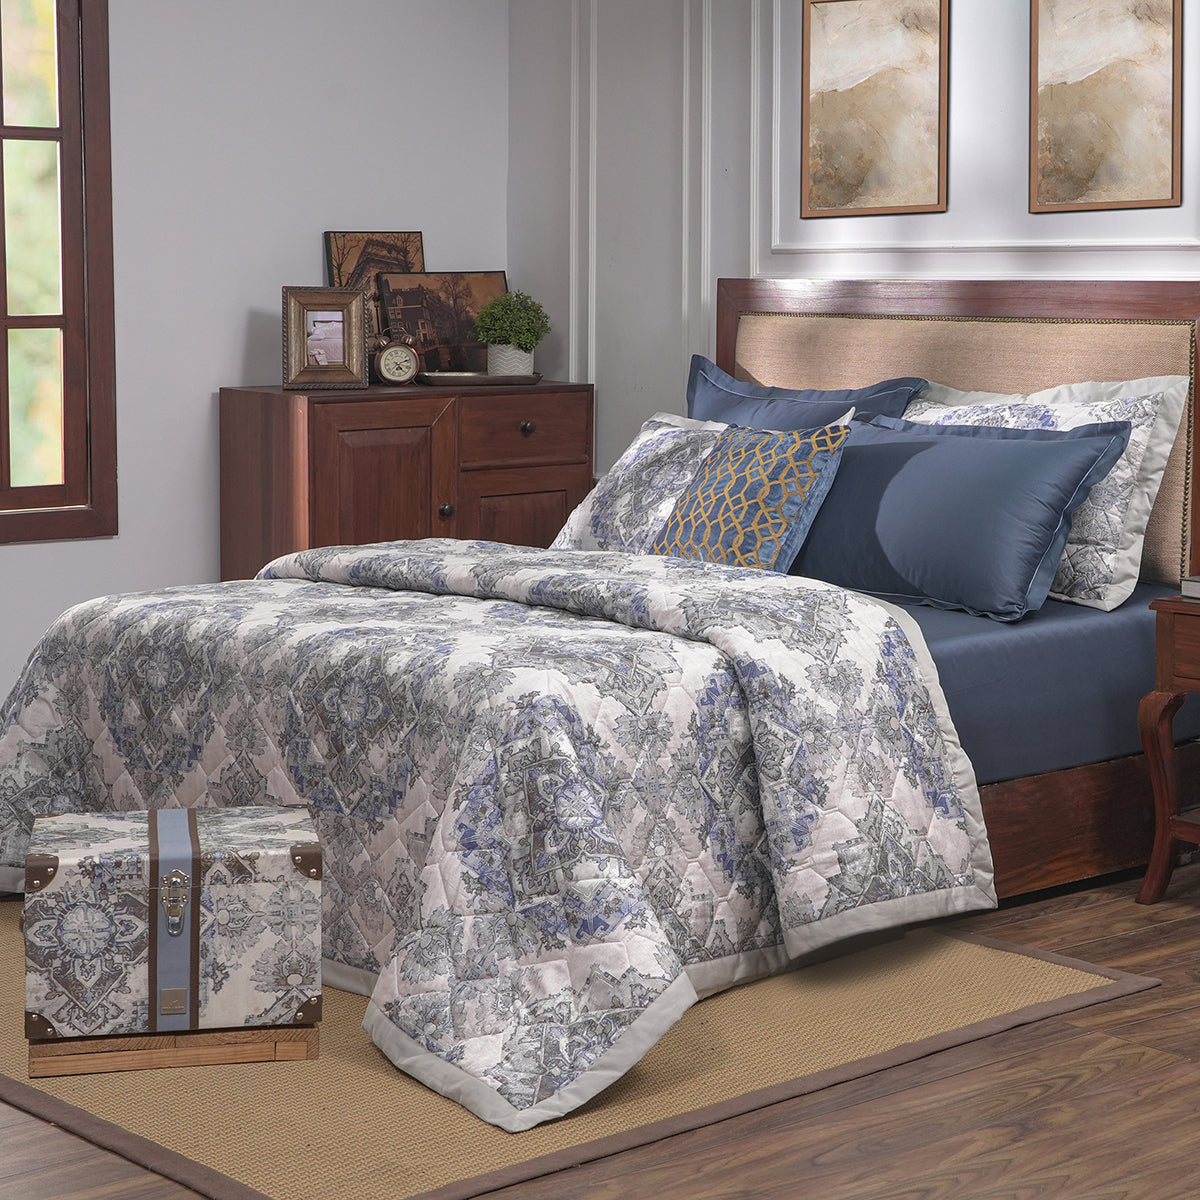 Utopian Regan Excessive Extreme 8PC Quilt/Quilted Bed Cover Set